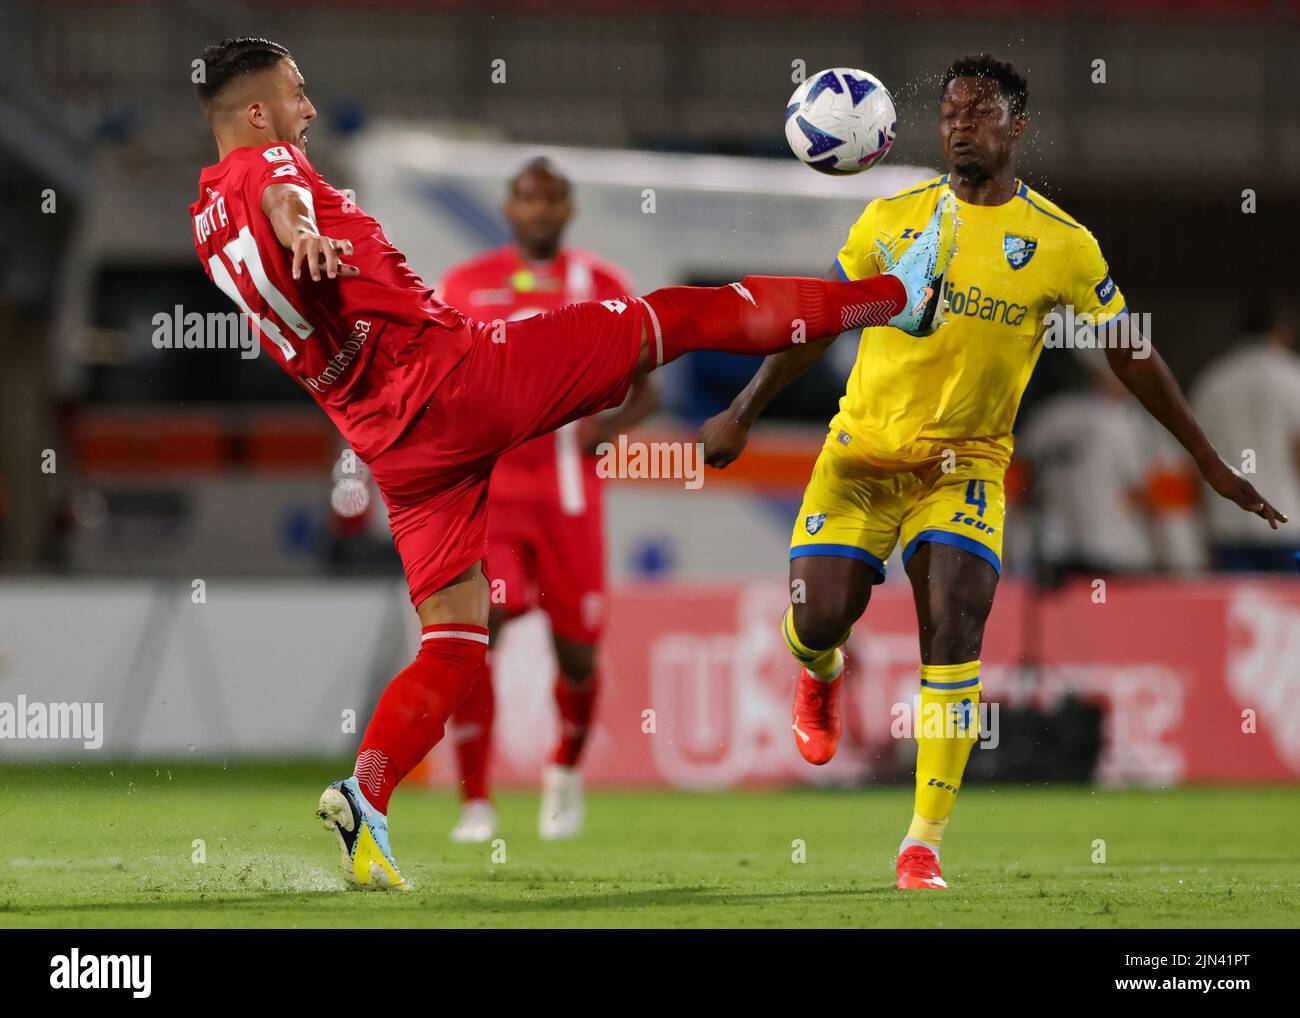 Monza, Italy, 7th August 2022. Dani Mota Carvalho of AC Monza controls the ball as Ben Kone of Frosinone Calcio closes in during the Coppa Italia match at U-Power Stadium, Monza. Picture credit should read: Jonathan Moscrop / Sportimage Stock Photo